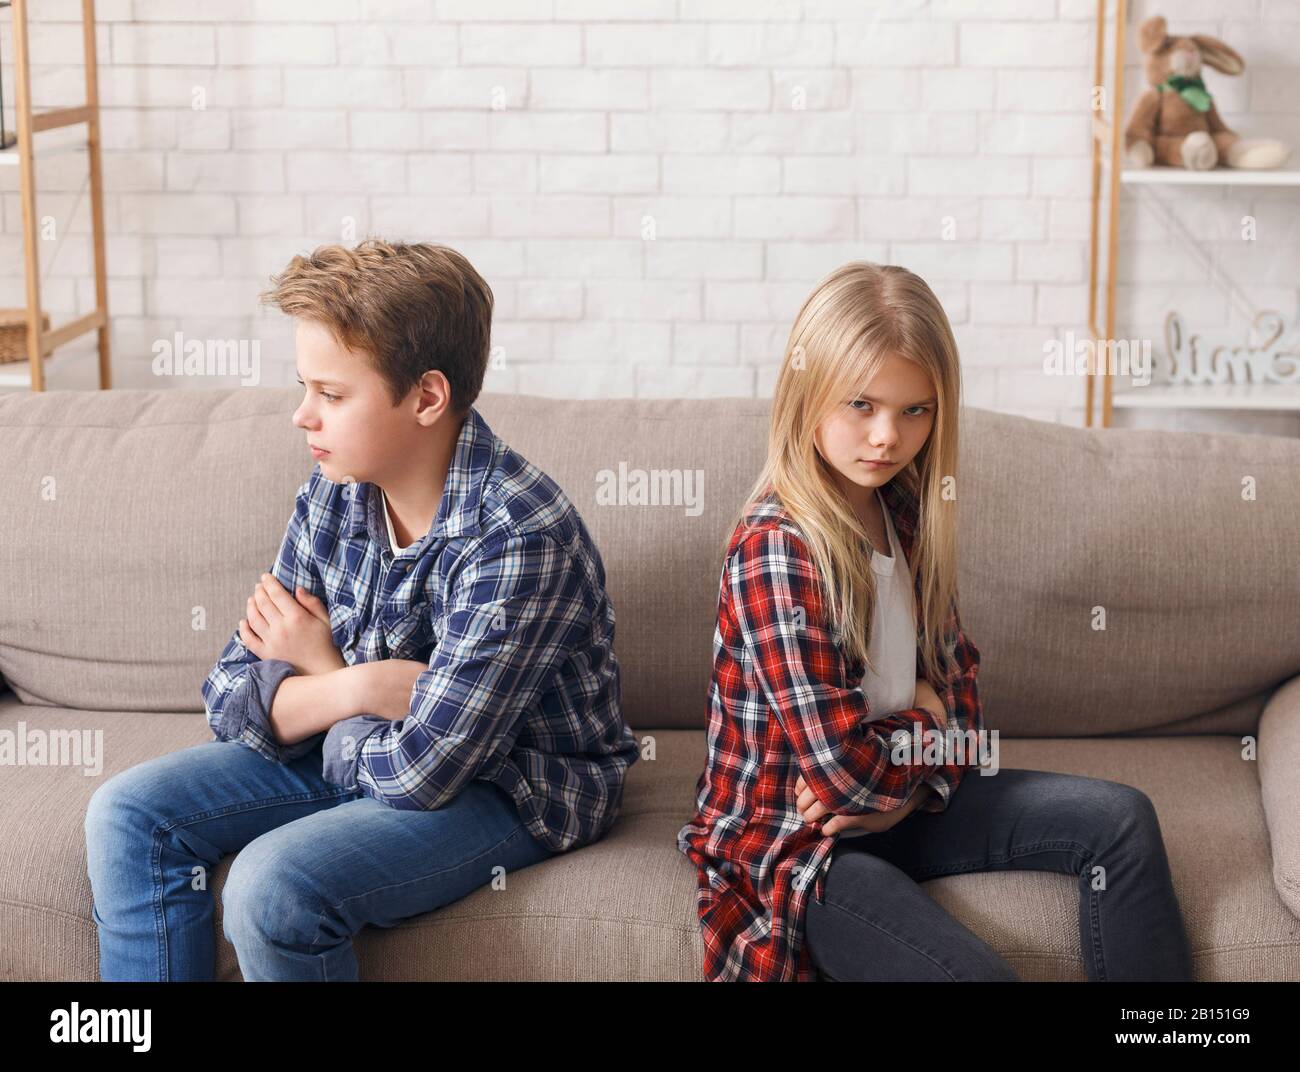 Brother And Sister Not Talking After Quarrel Sitting On Couch Stock Photo